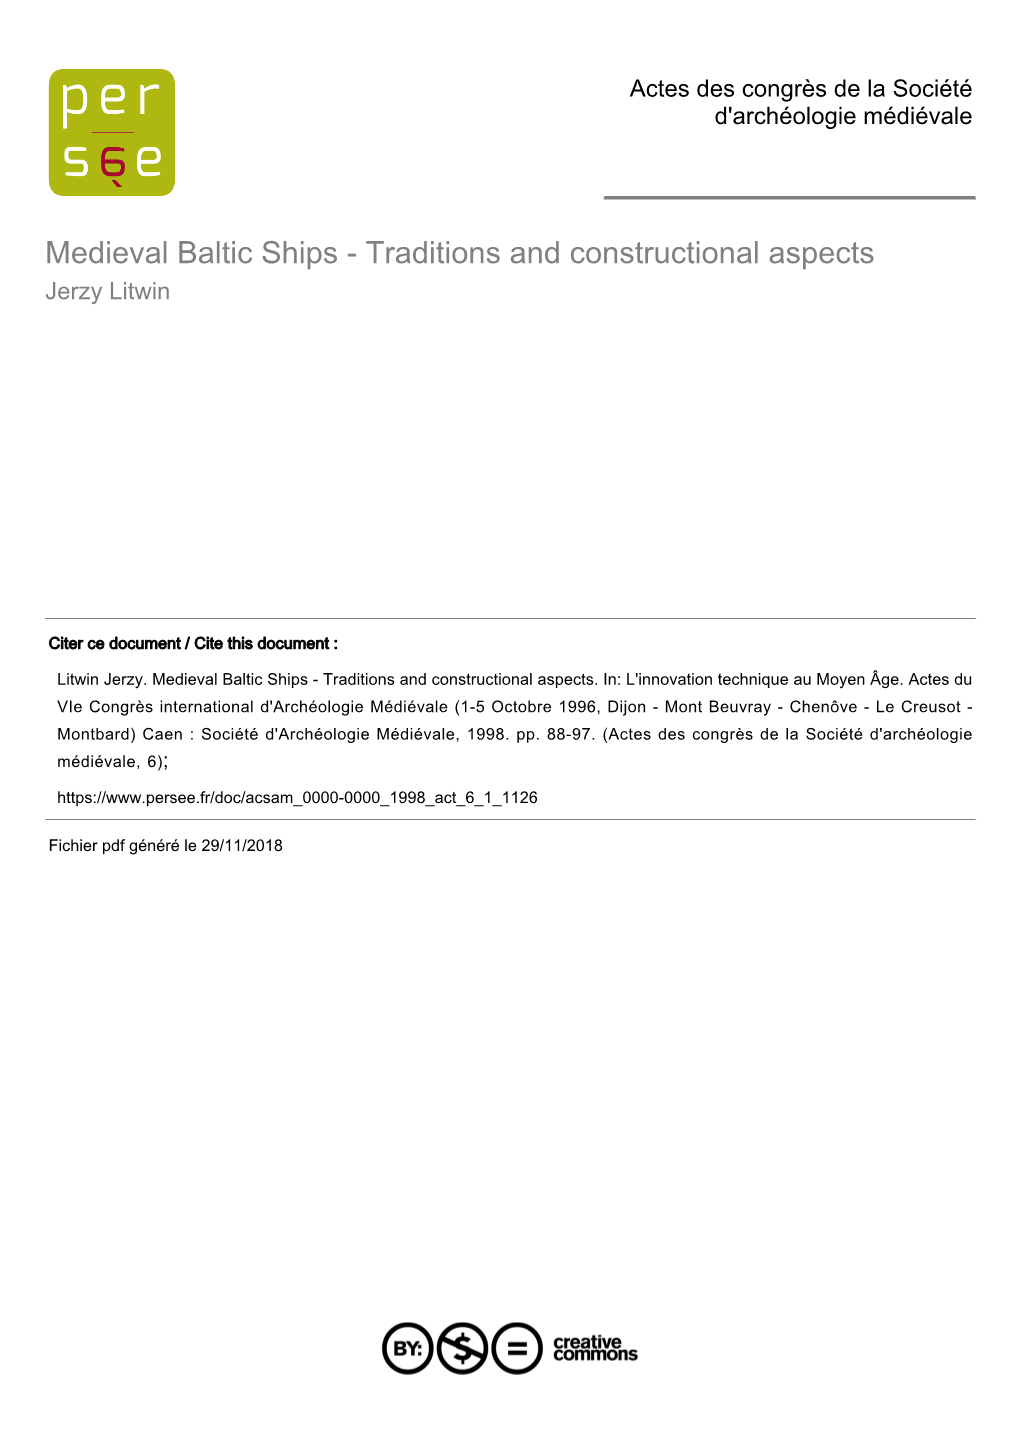 Medieval Baltic Ships - Traditions and Constructional Aspects Jerzy Litwin